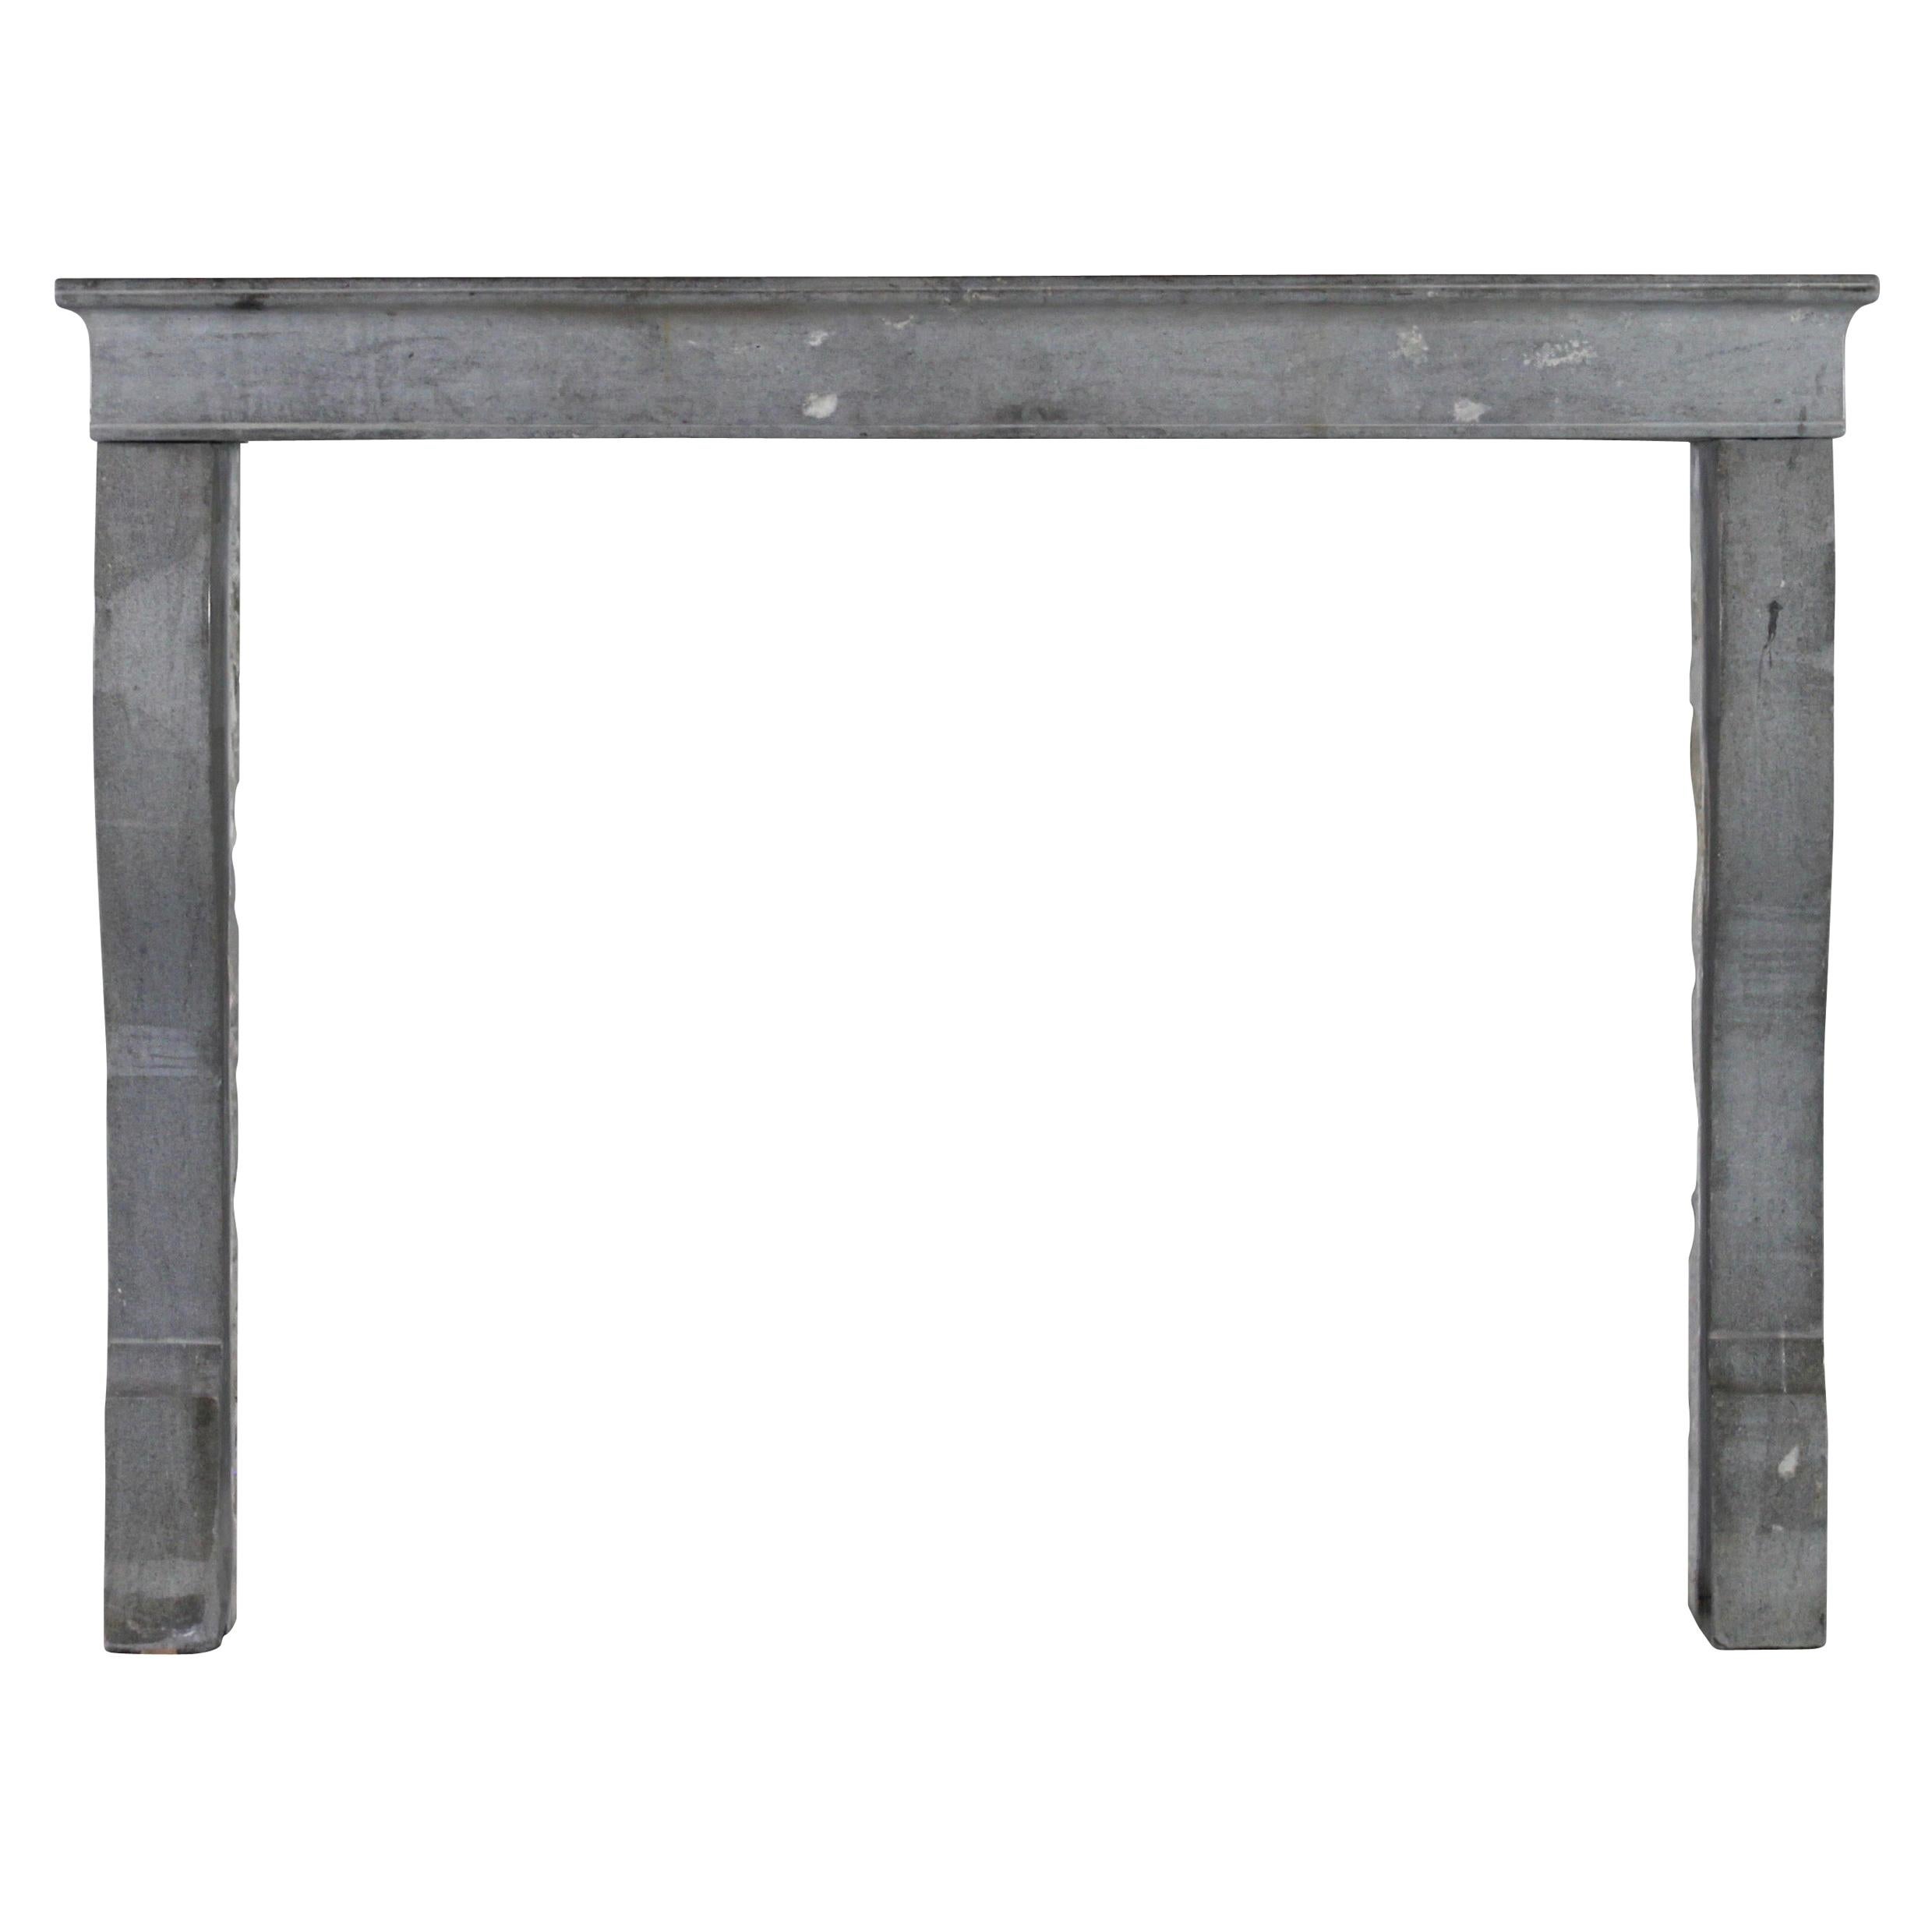 19th Century Small Timeless Vintage European Fireplace Surround For Sale